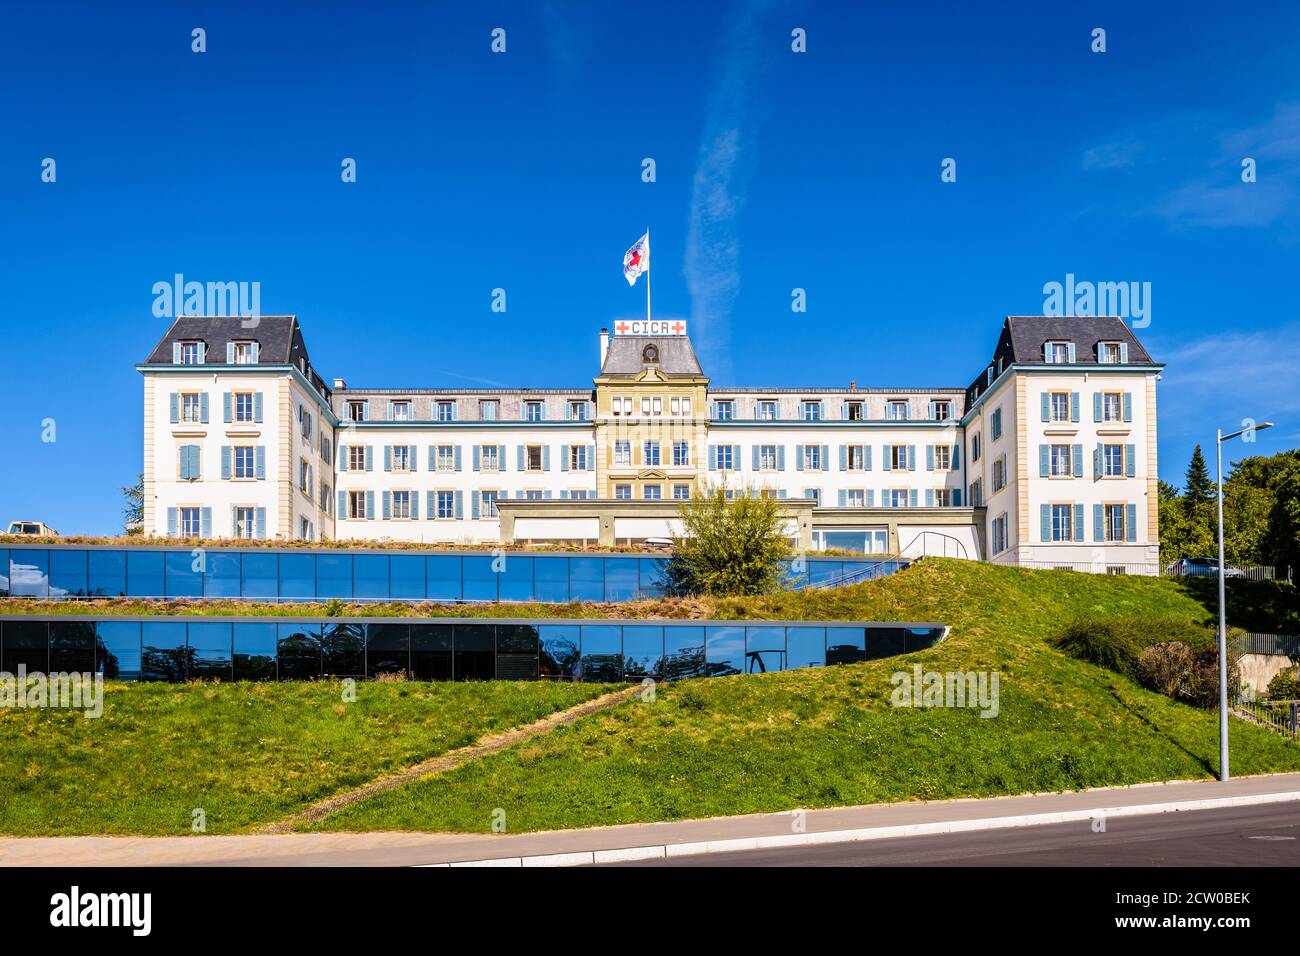 Facade of the headquarters of the International Committee of the Red Cross  (ICRC), an international humanitarian institution in Geneva, Switzerland  Stock Photo - Alamy